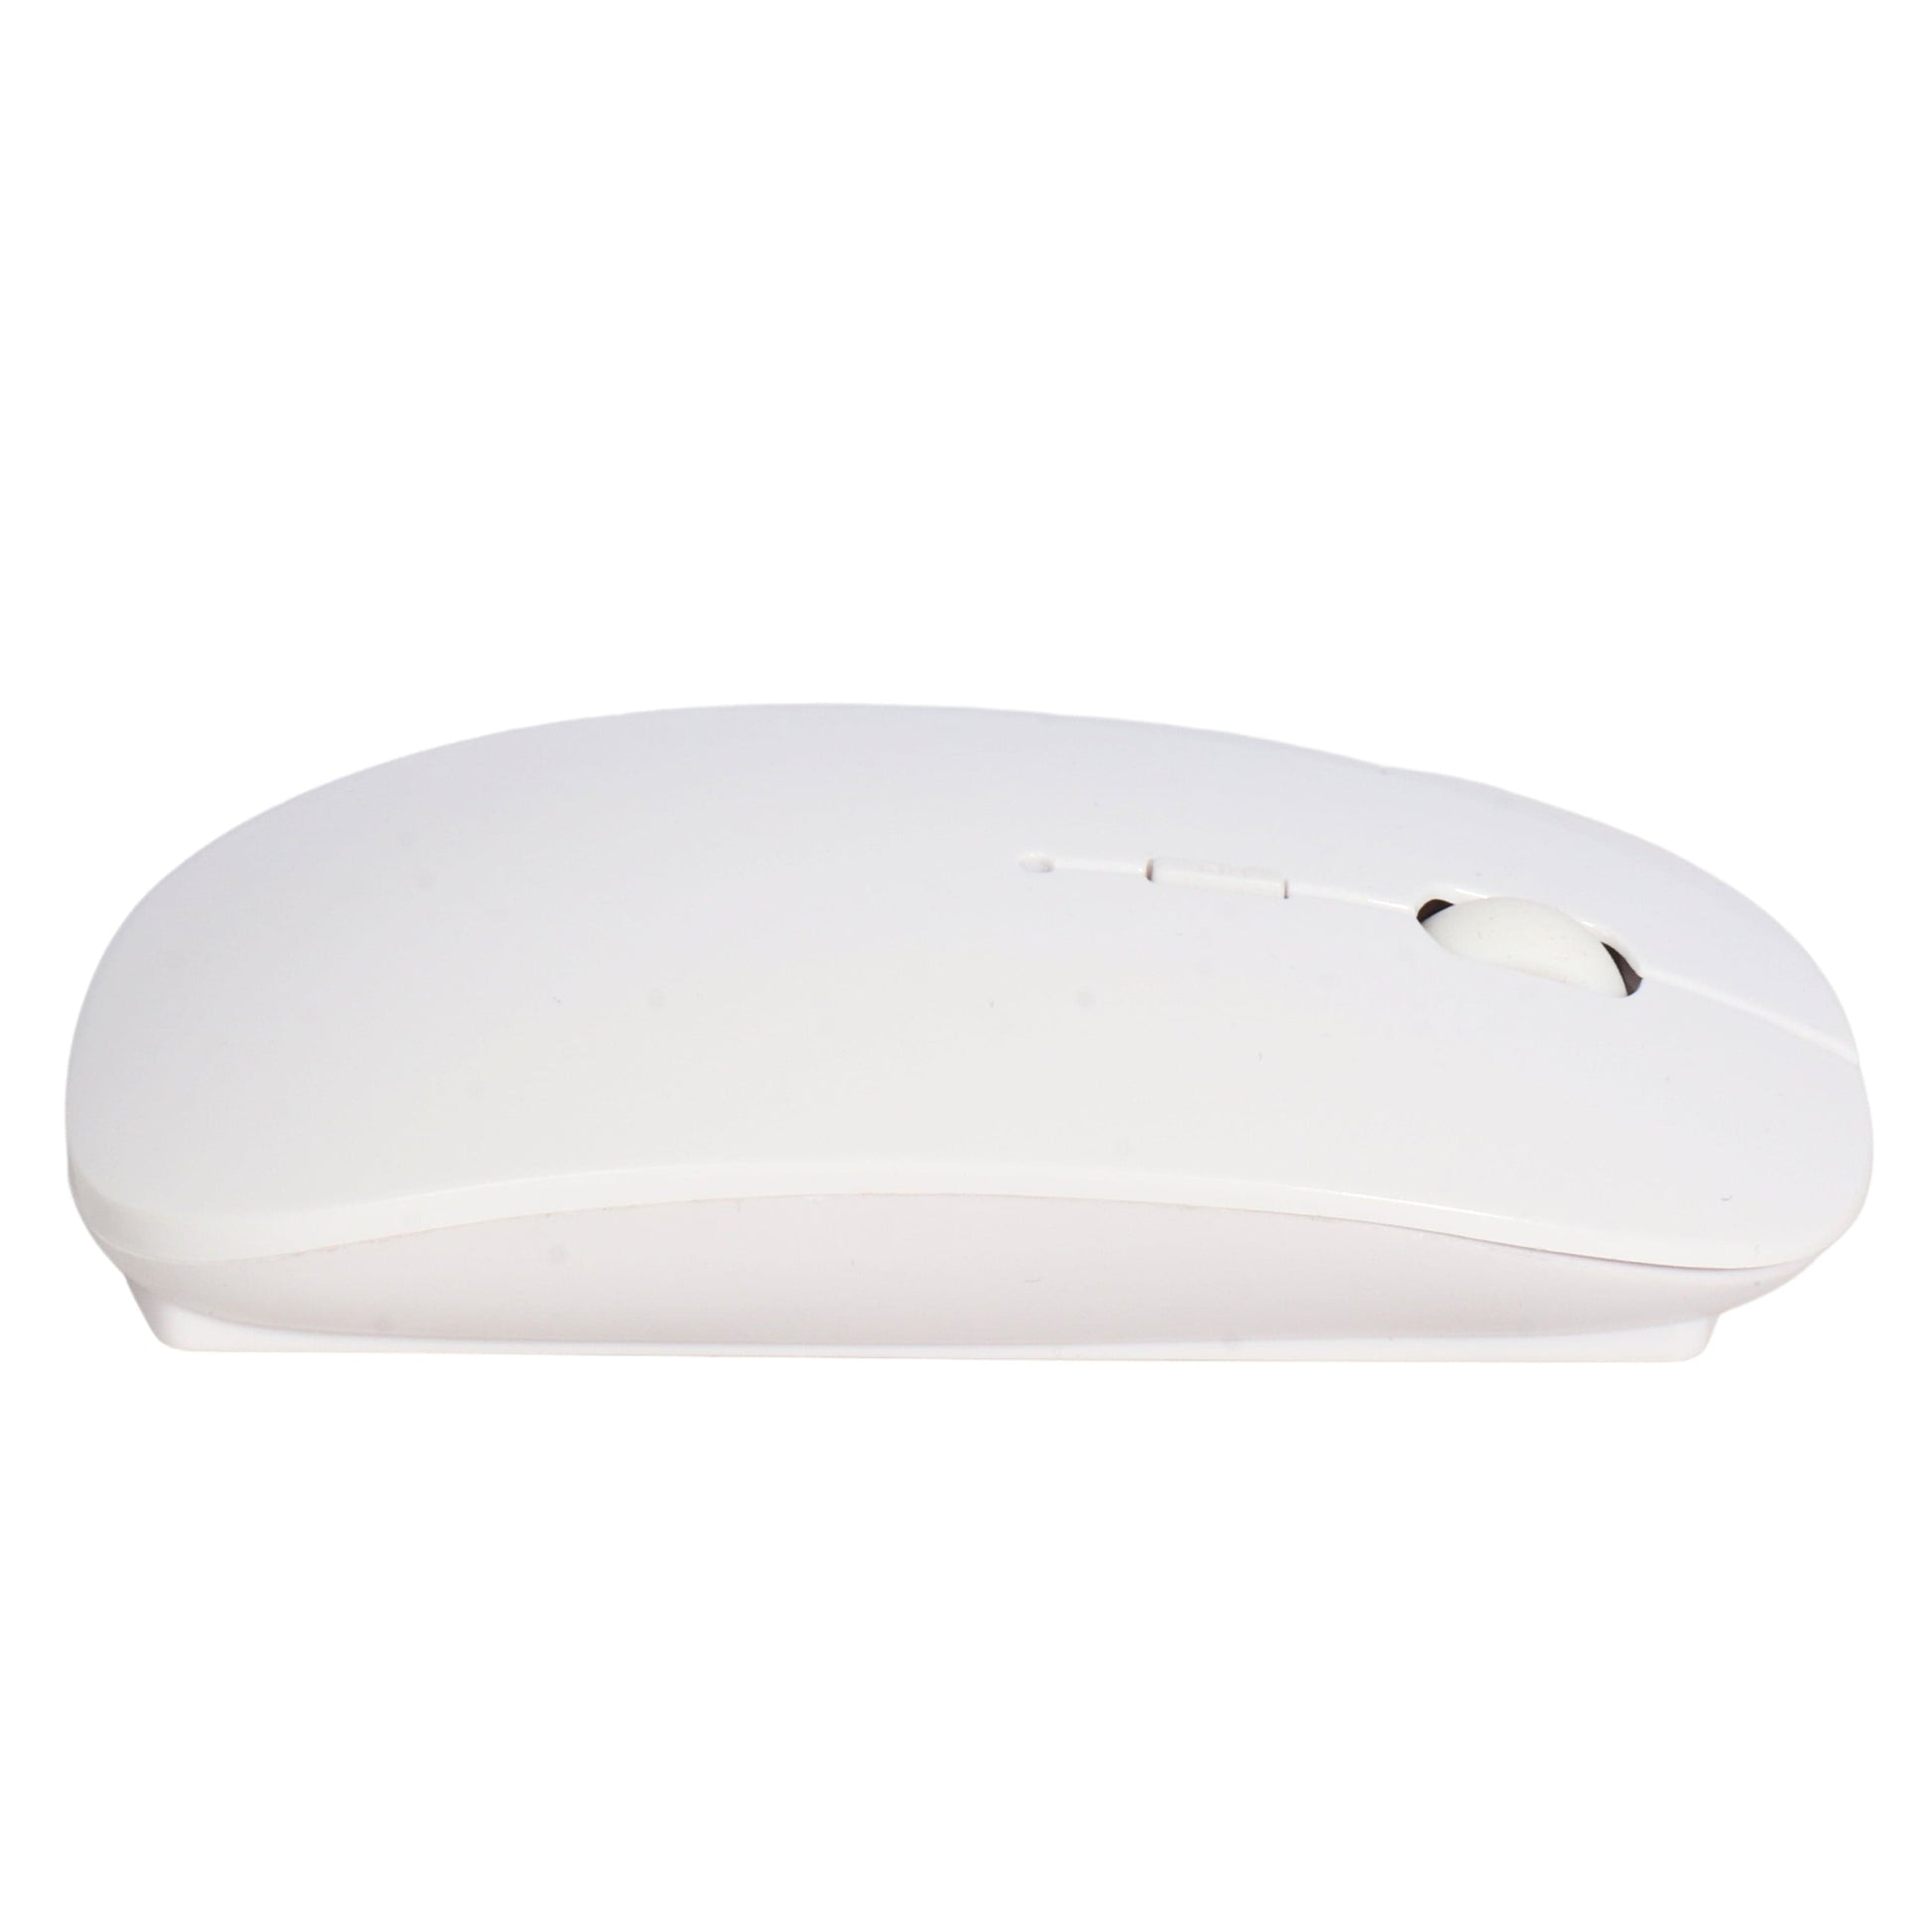 BRANDS & BEYOND Laptops & Accessories White Wirless Mouse